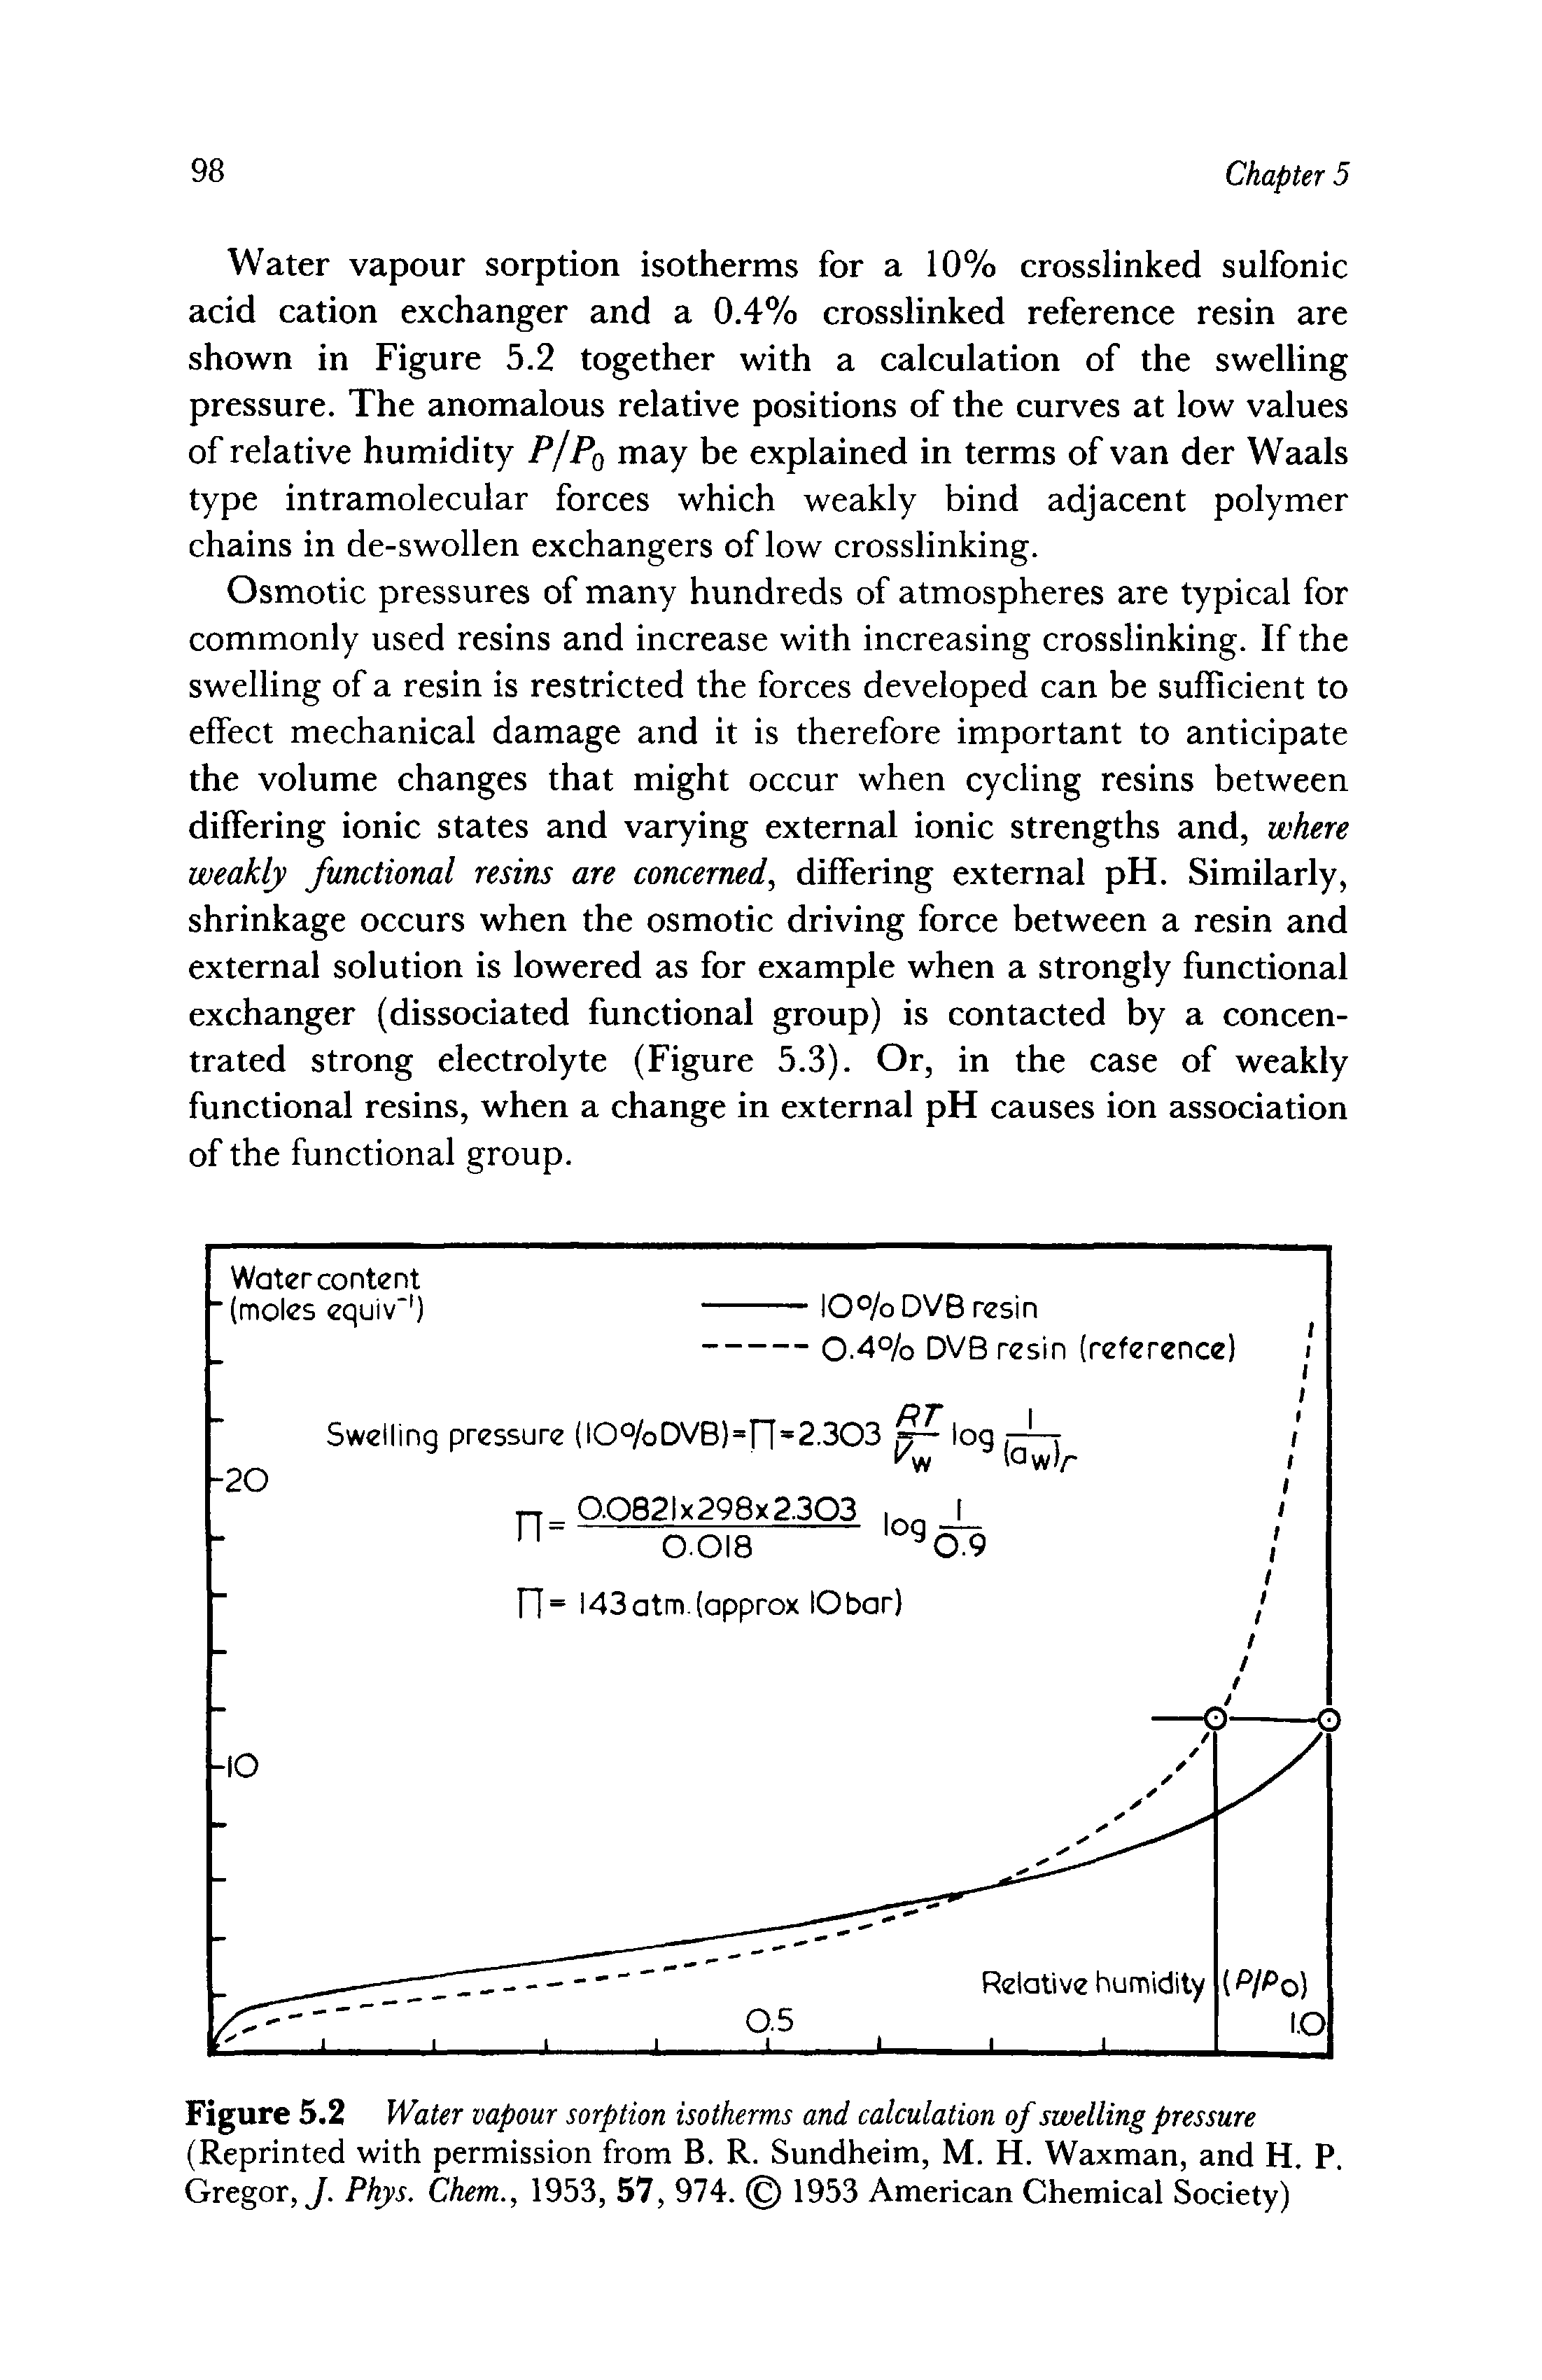 Figure 5.2 Water vapour sorption isotherms and calculation of swelling pressure (Reprinted with permission from B. R. Sundheim, M. H. Waxman, and H. P. Gregor, Phys. Chem., 1953, 57, 974. 1953 American Chemical Society)...